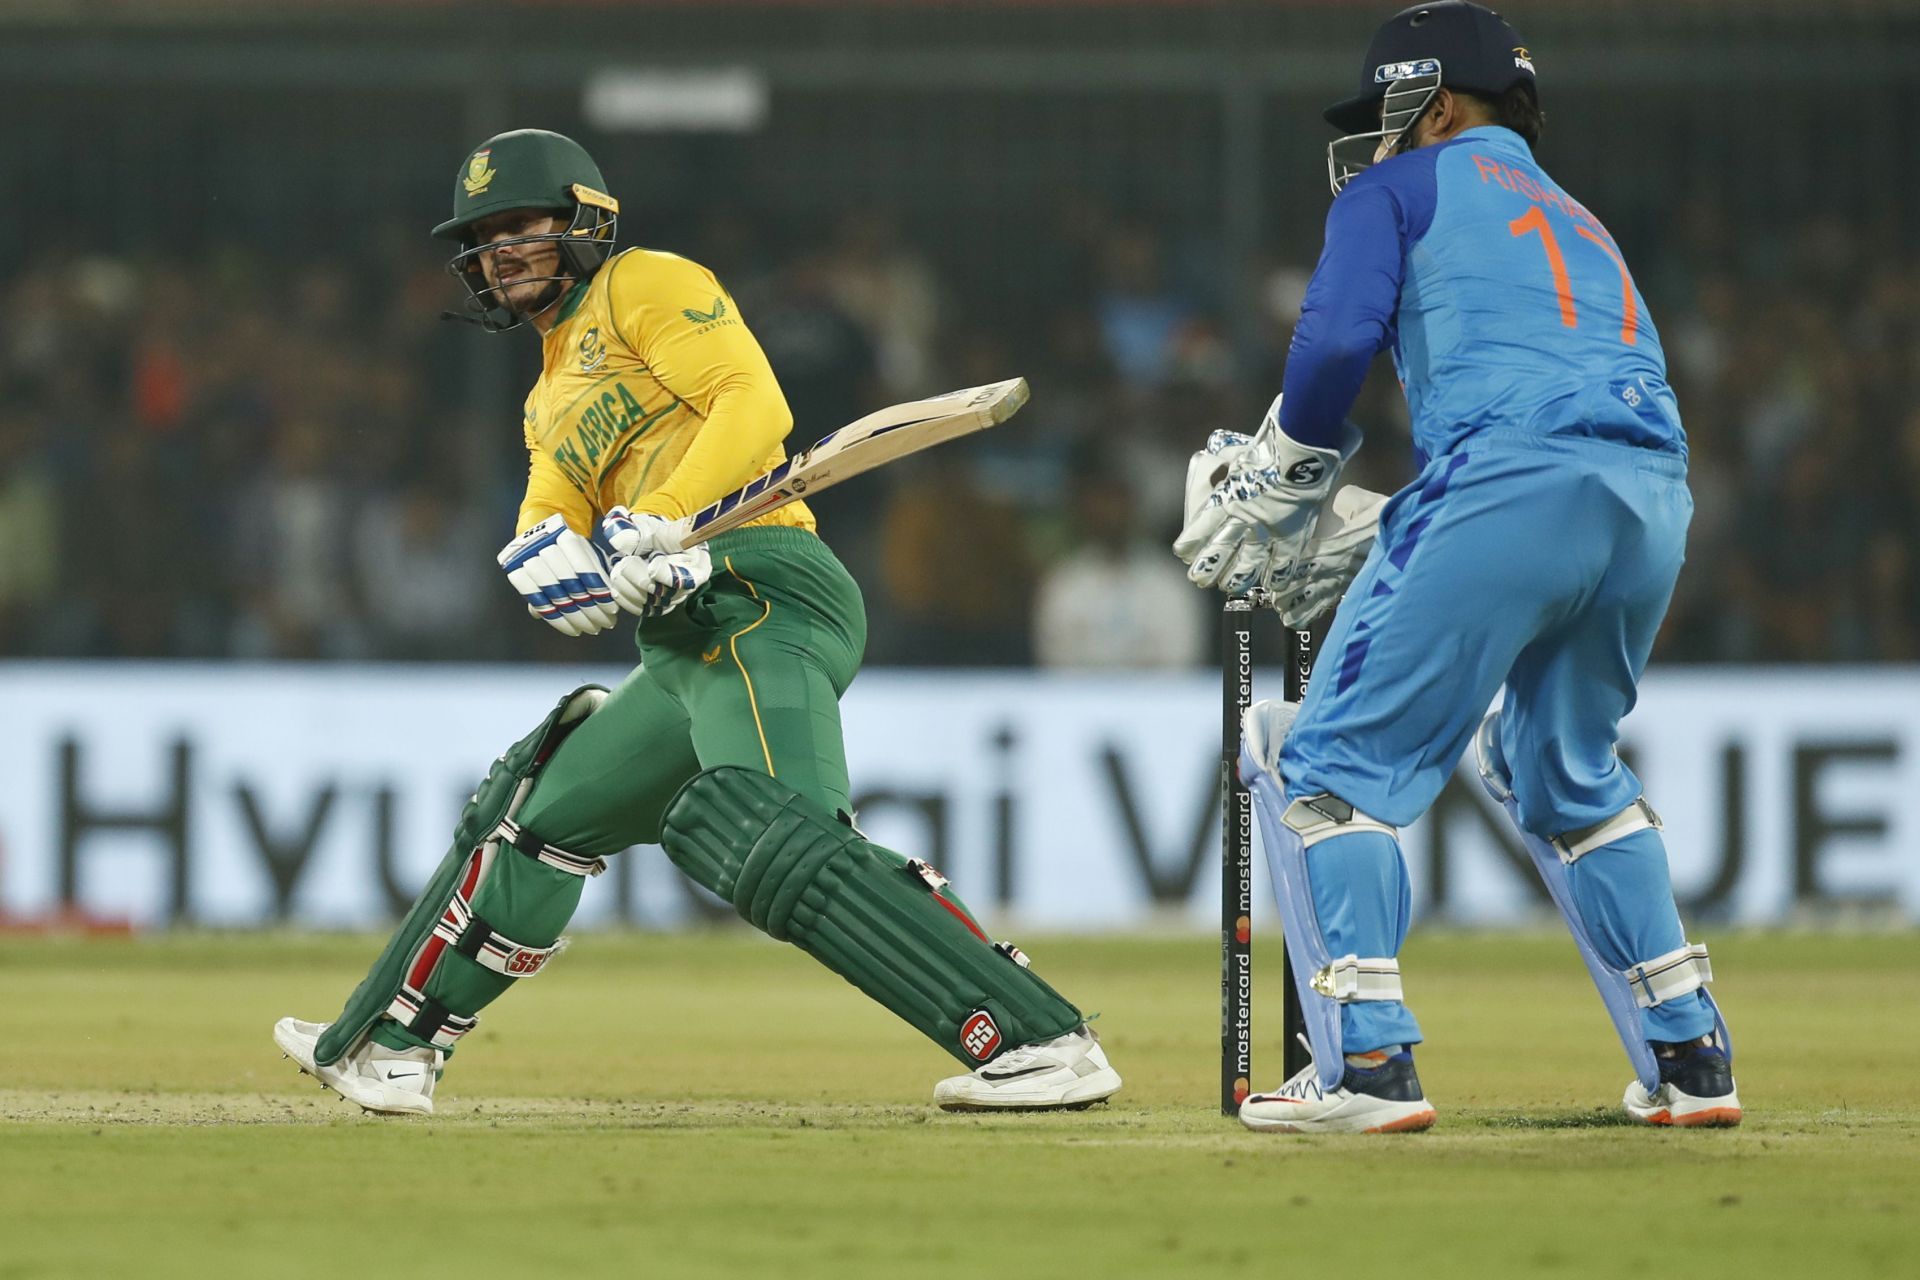 Quinton de Kock likes playing against India. (Pic: Getty Images)